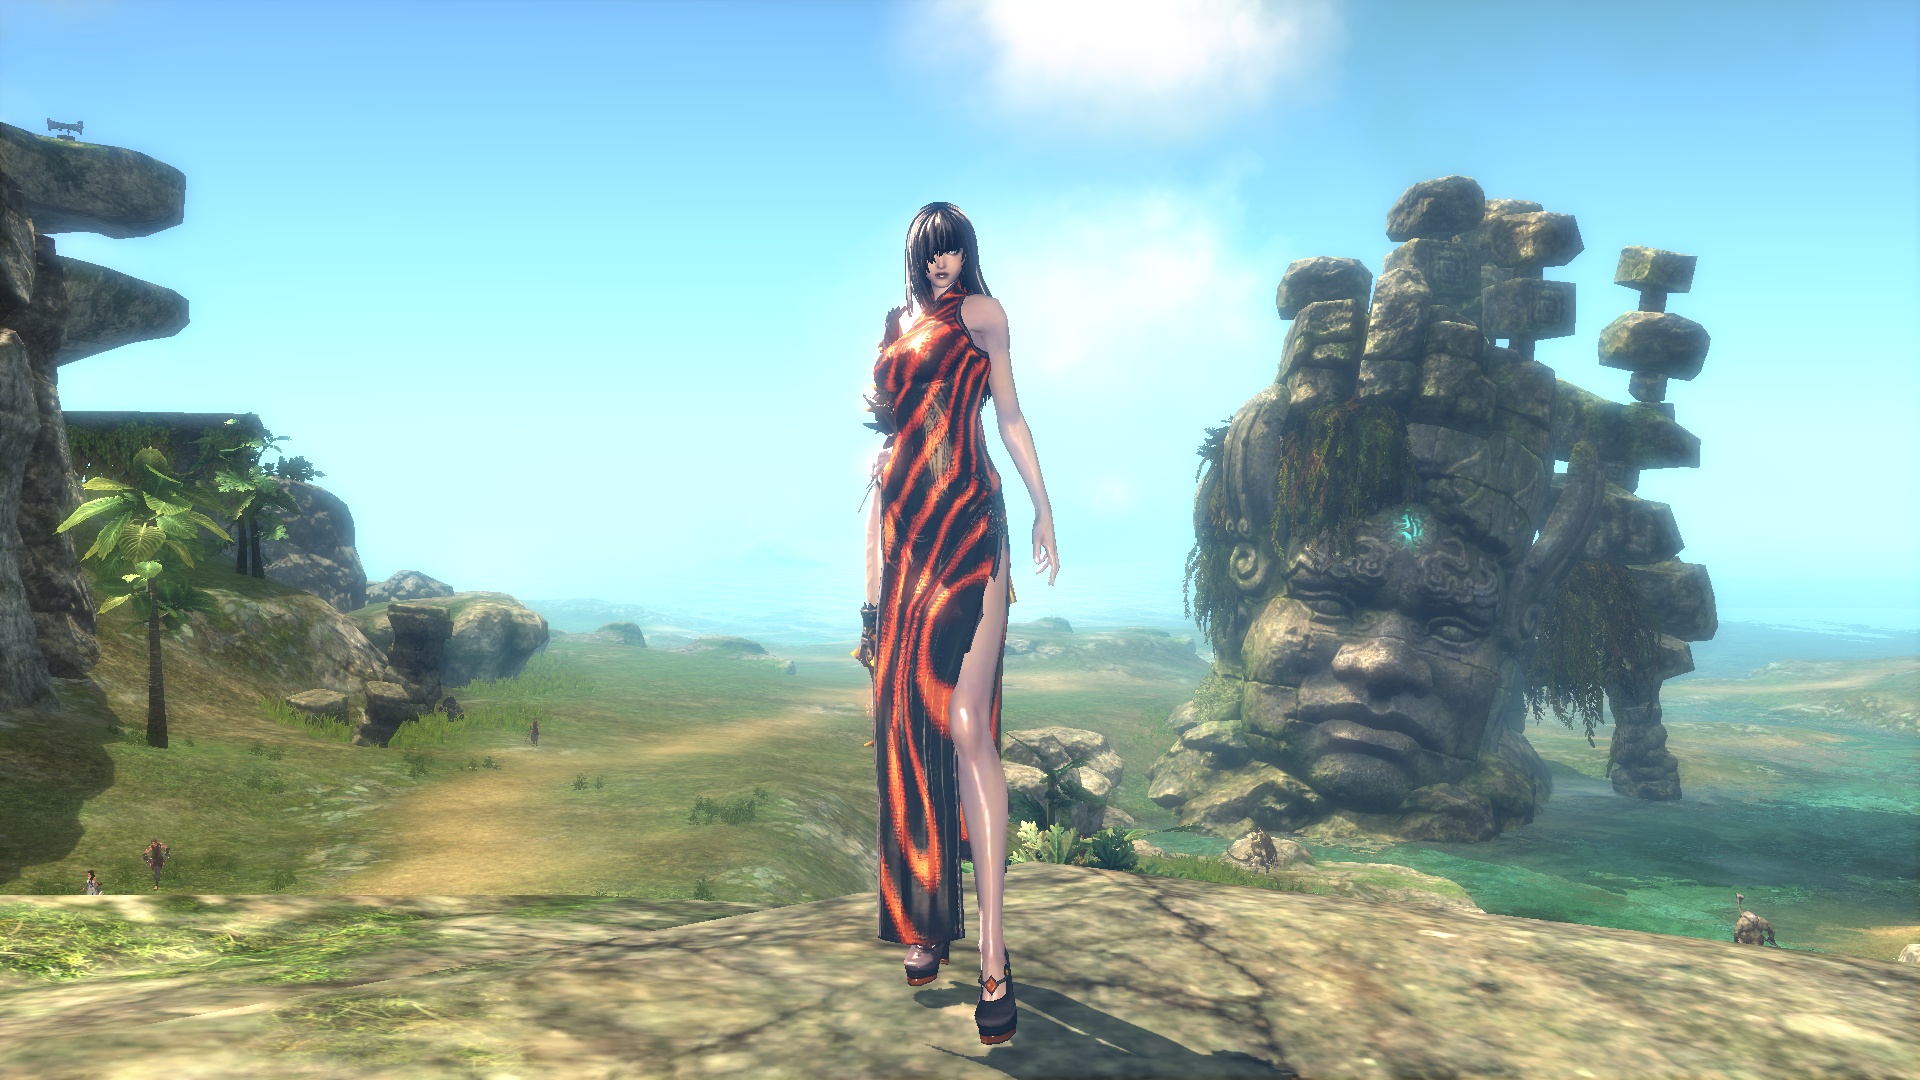 Blade&Soul Costume Guide: How to Get the Red Specter